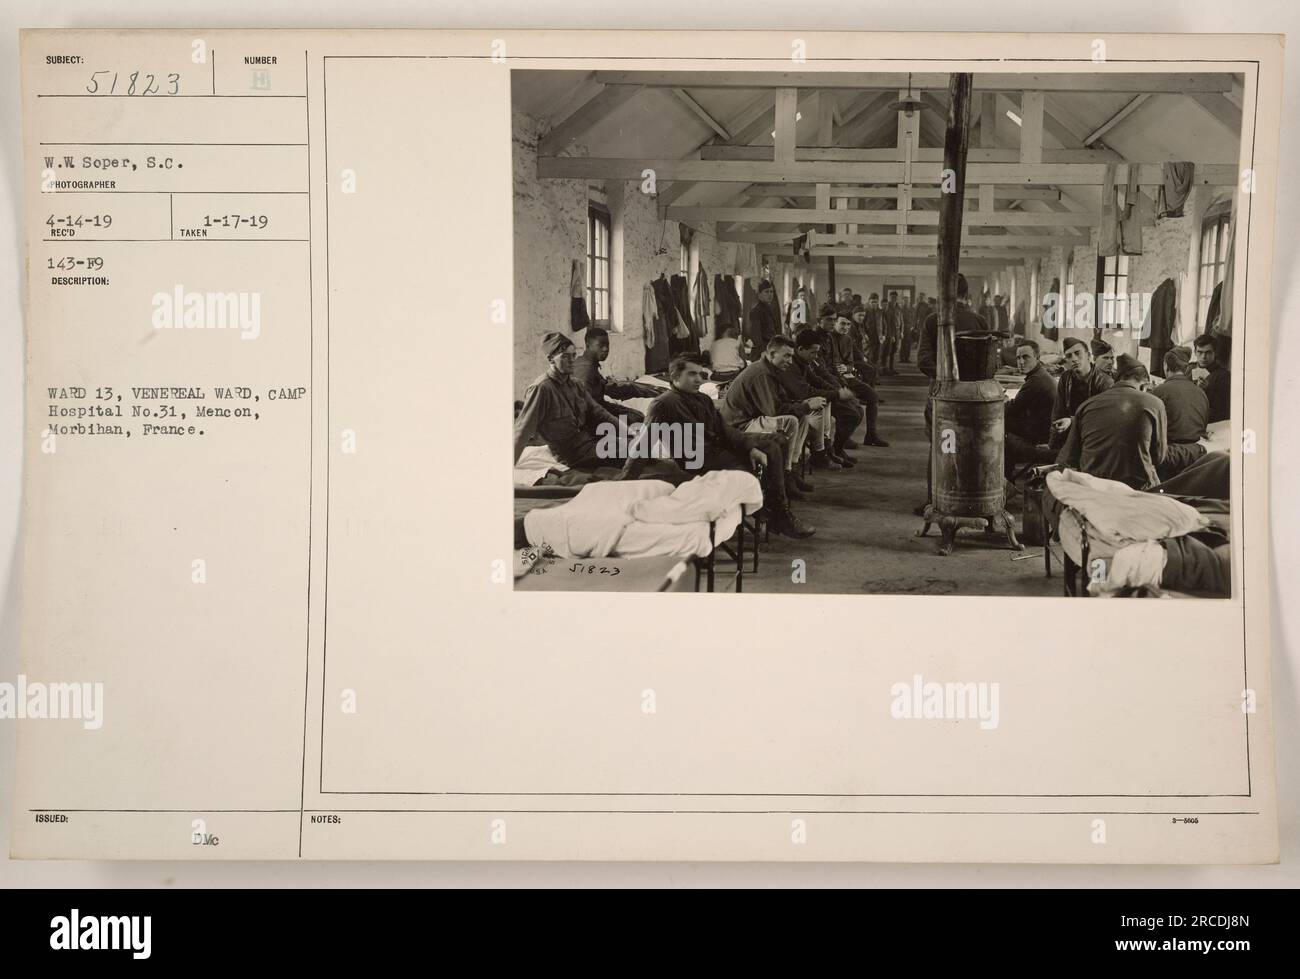 This photograph, taken by W. Soper on April 14, 1919, shows Ward 13, the Venereal Ward, at Camp Hospital No. 31 in Menc on, Morbihan, France. The image documents the medical facilities and activities associated with treating soldiers affected by venereal diseases during World War I. Stock Photo